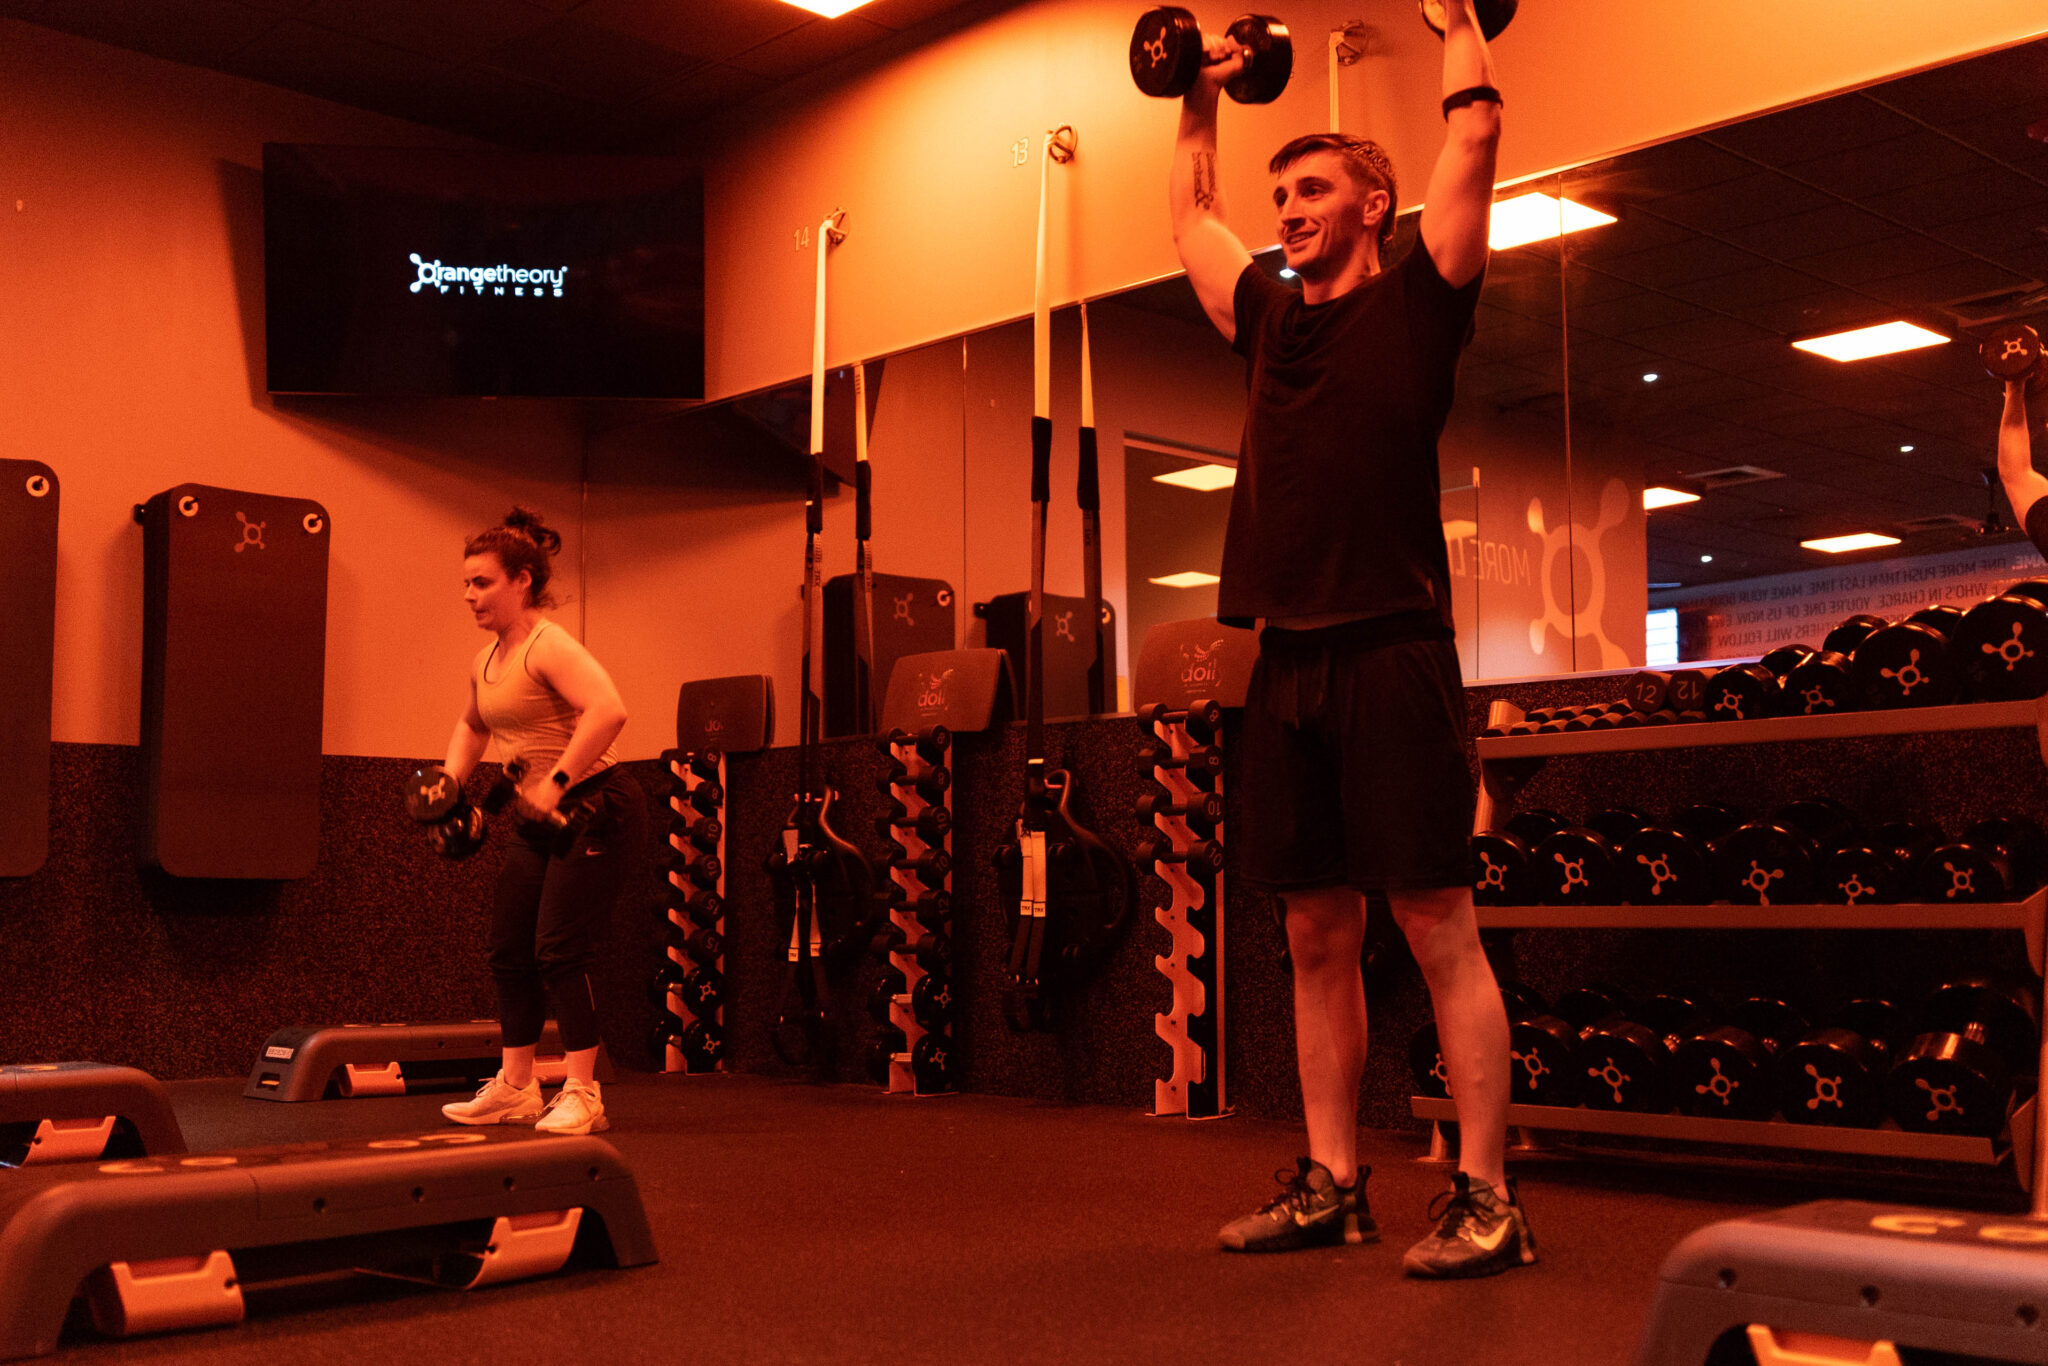 A first-timer’s guide to Orangetheory & one can’t-miss special